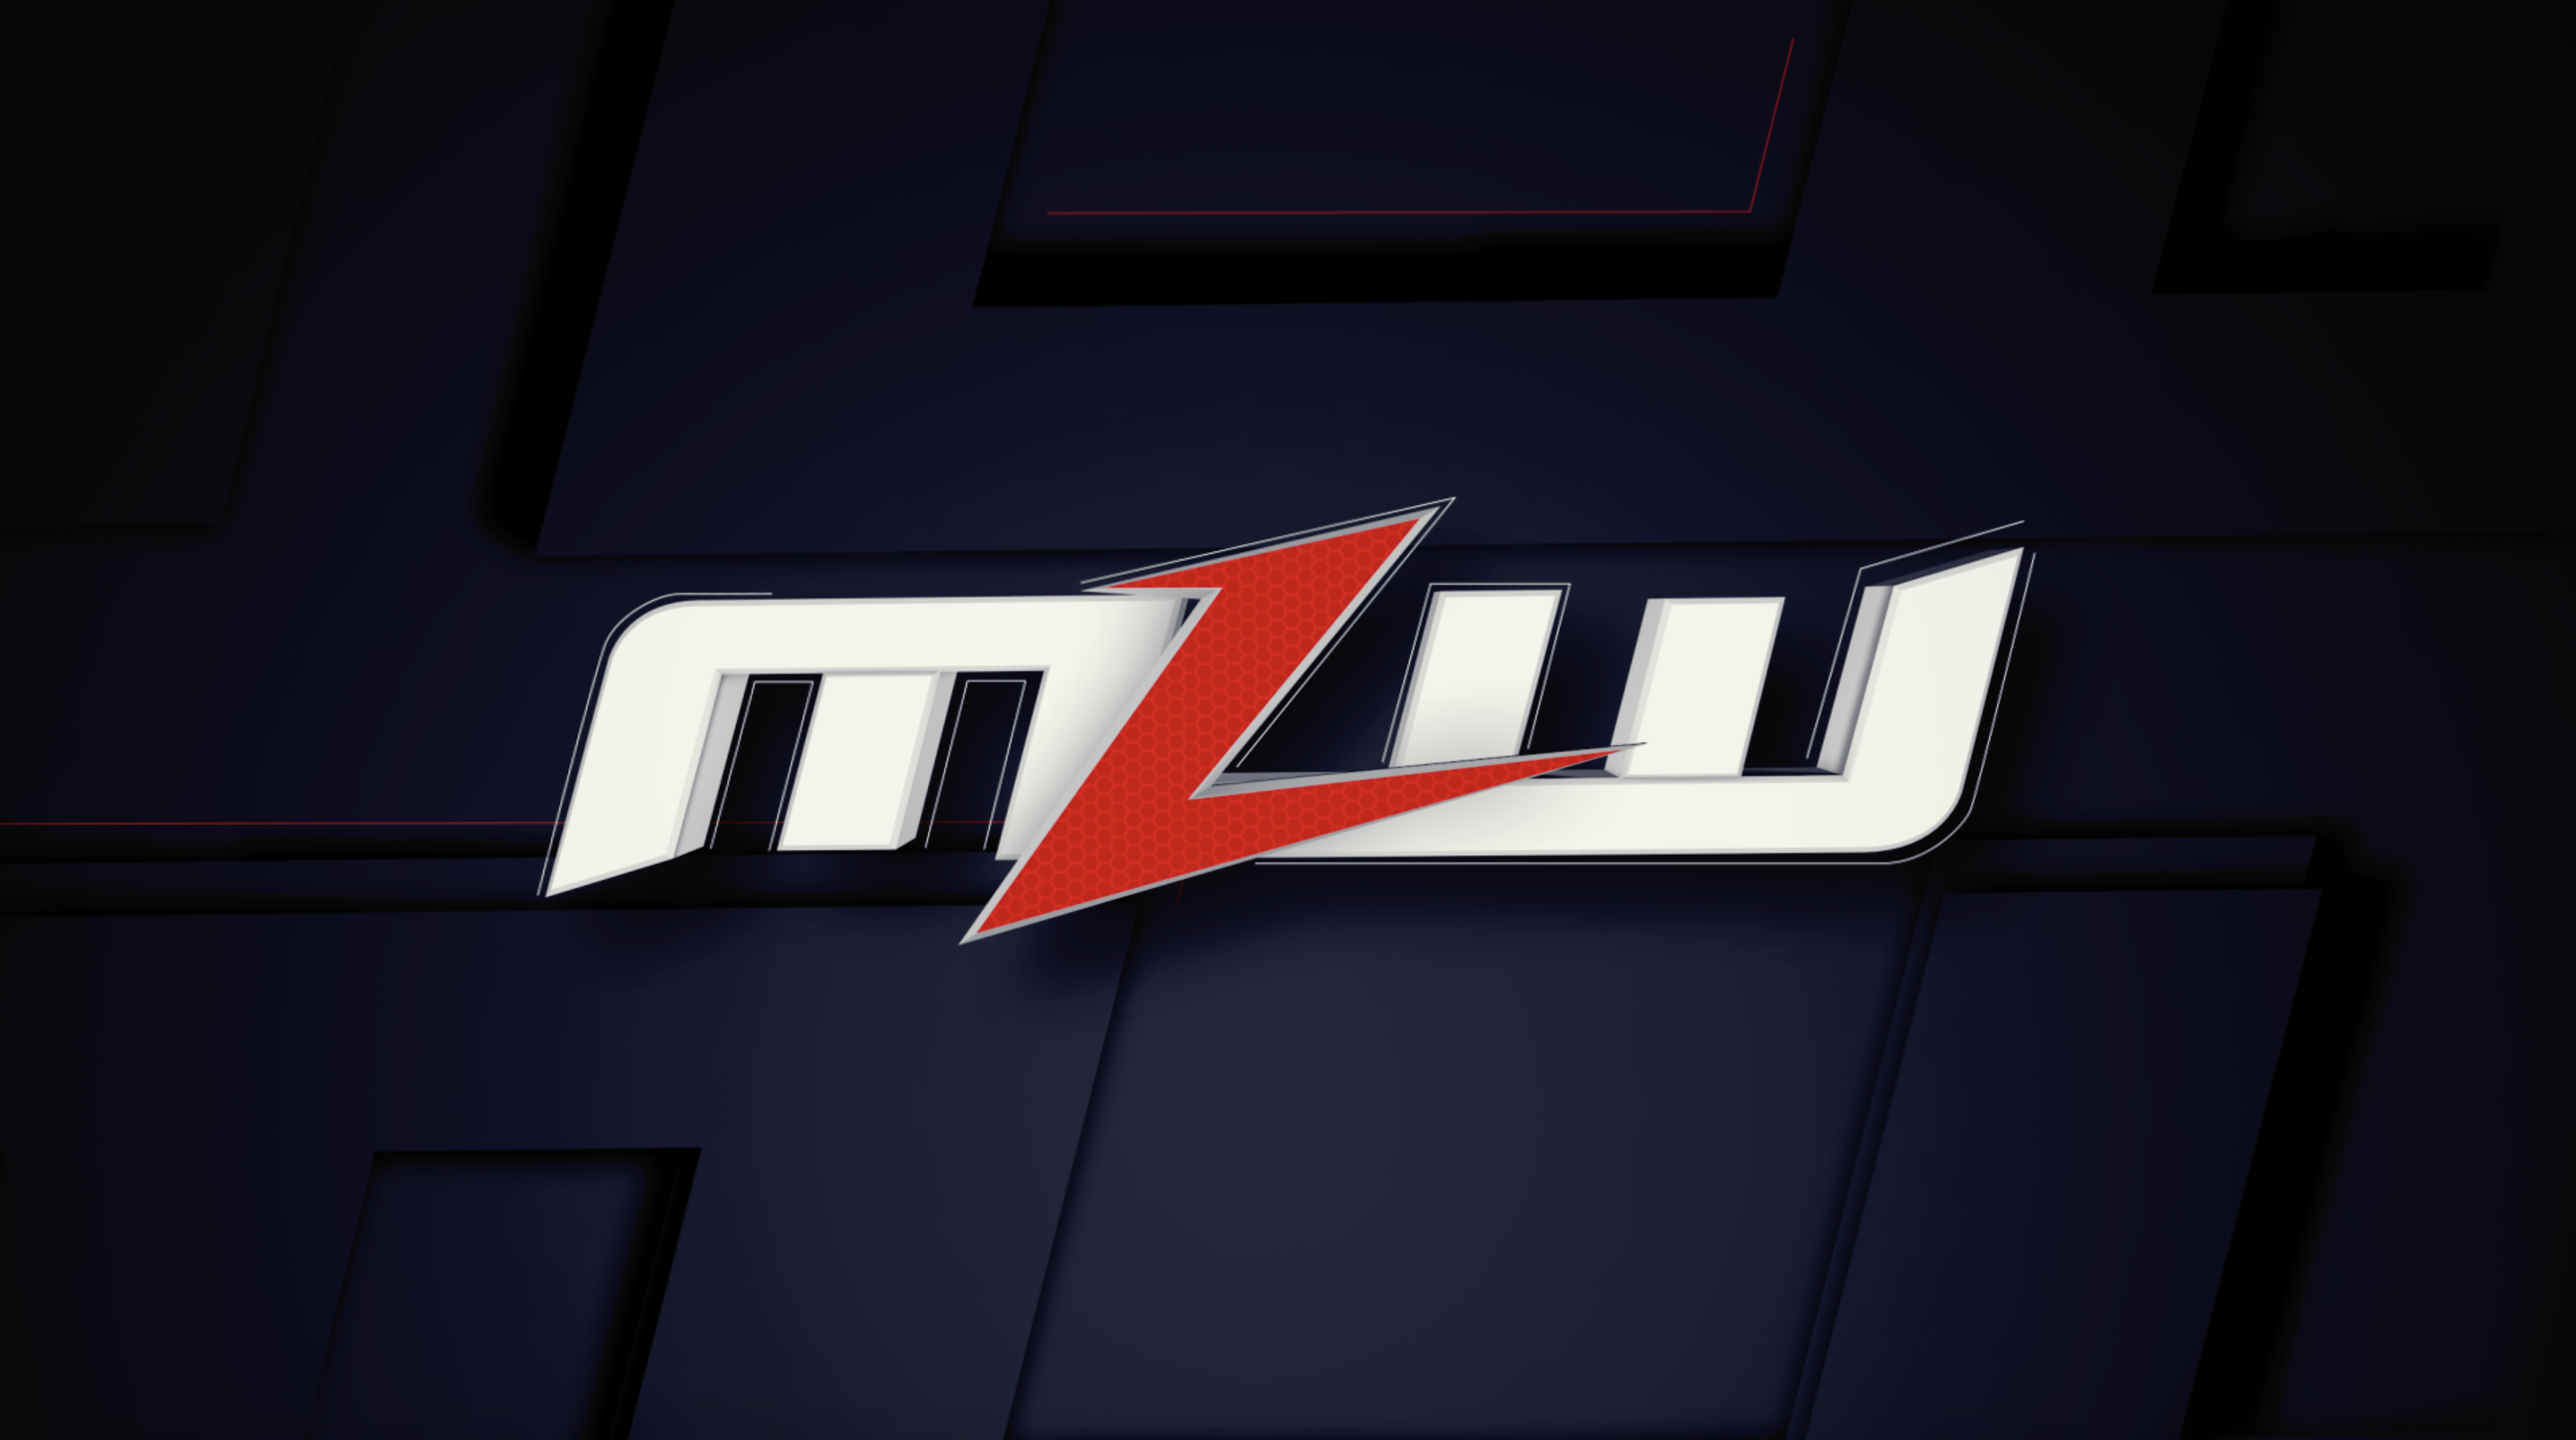 Richard Holliday Returns To MLW